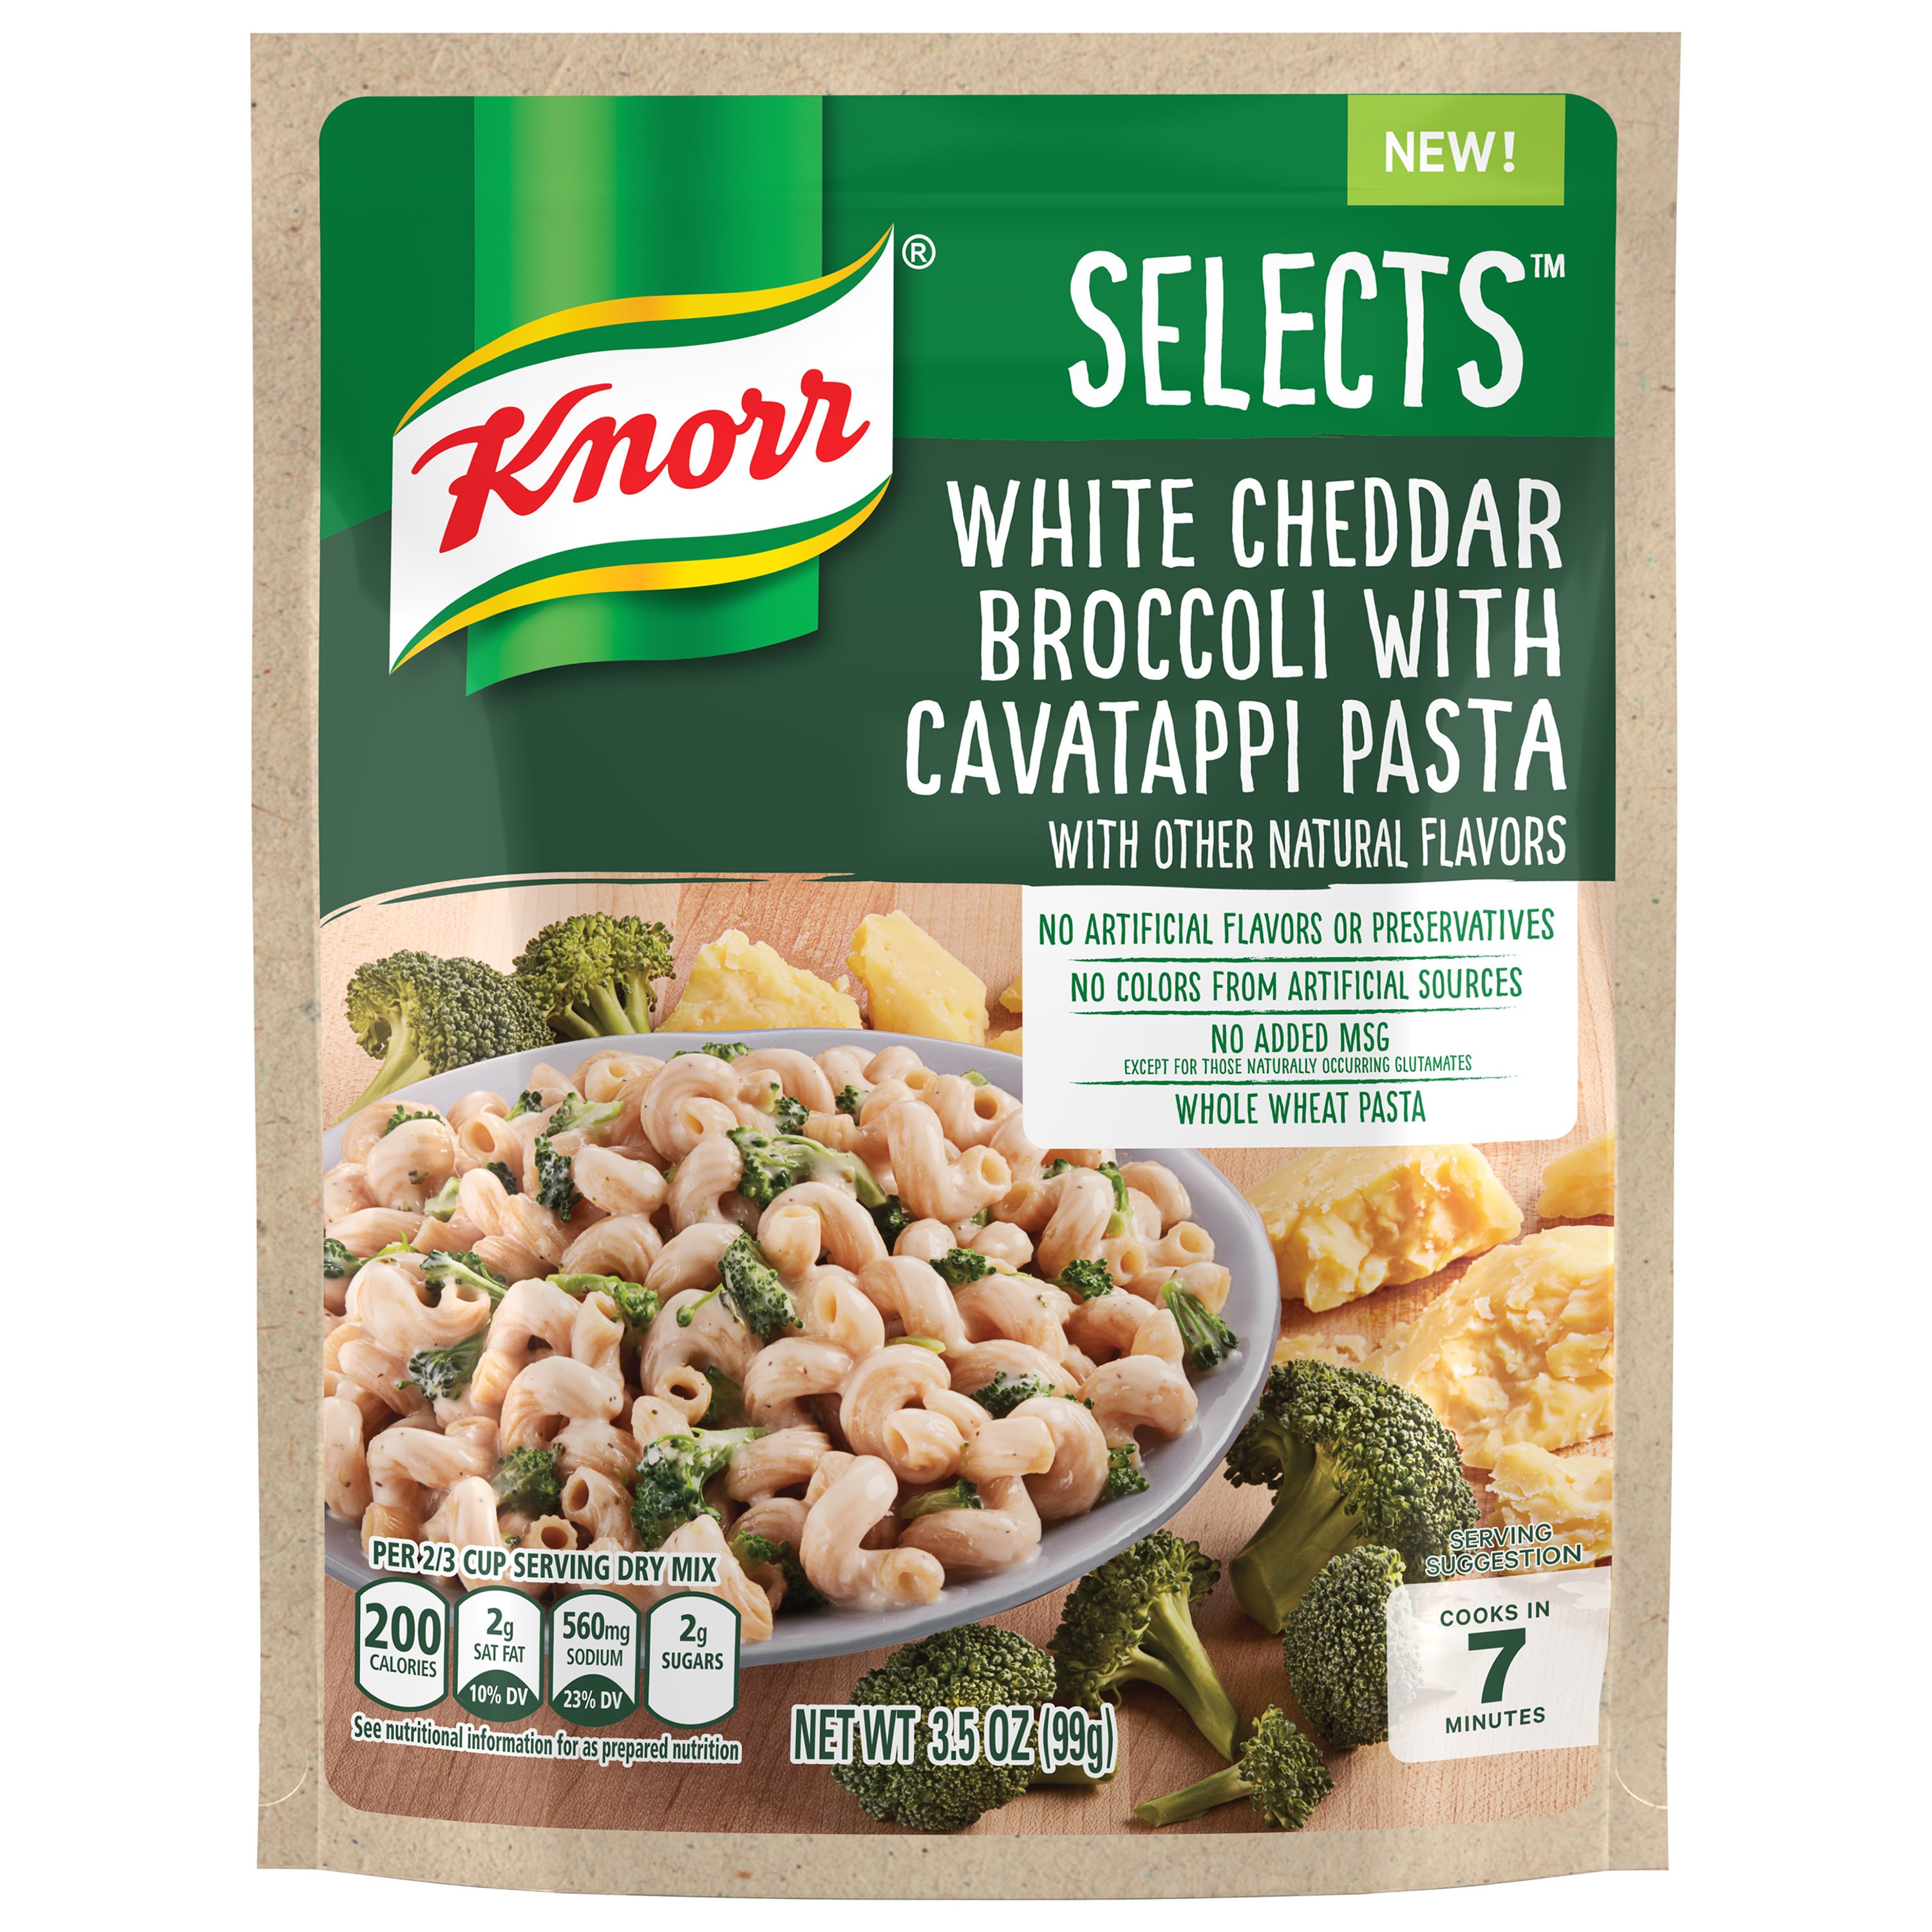 Download Knorr Selects Cheddar Broccoli Whole Wheat Cavatappi Pasta Shop Pantry Meals At H E B